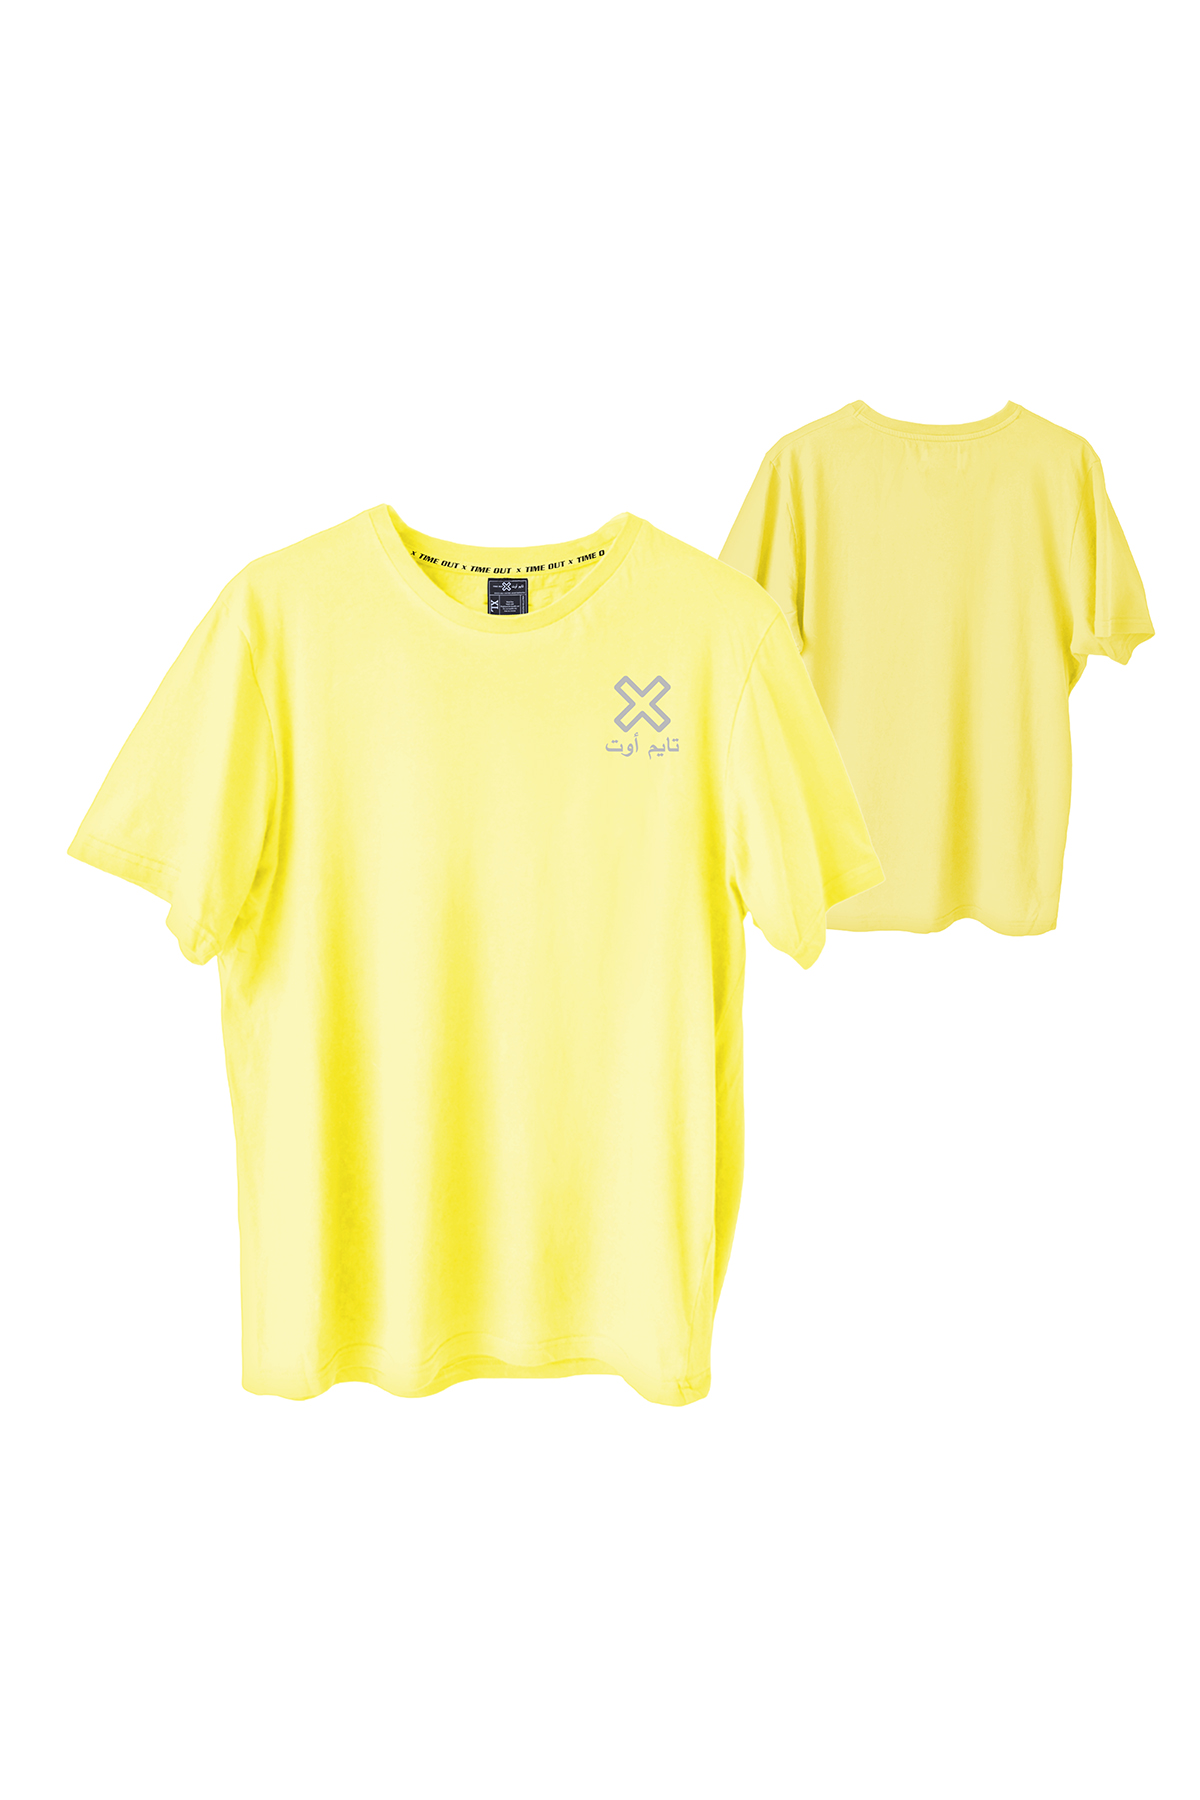 Time-Out-X-Signature-Short-Sleeve-Classic-Training-T-Shirt—Pastel-Yellow—Front-and-Back